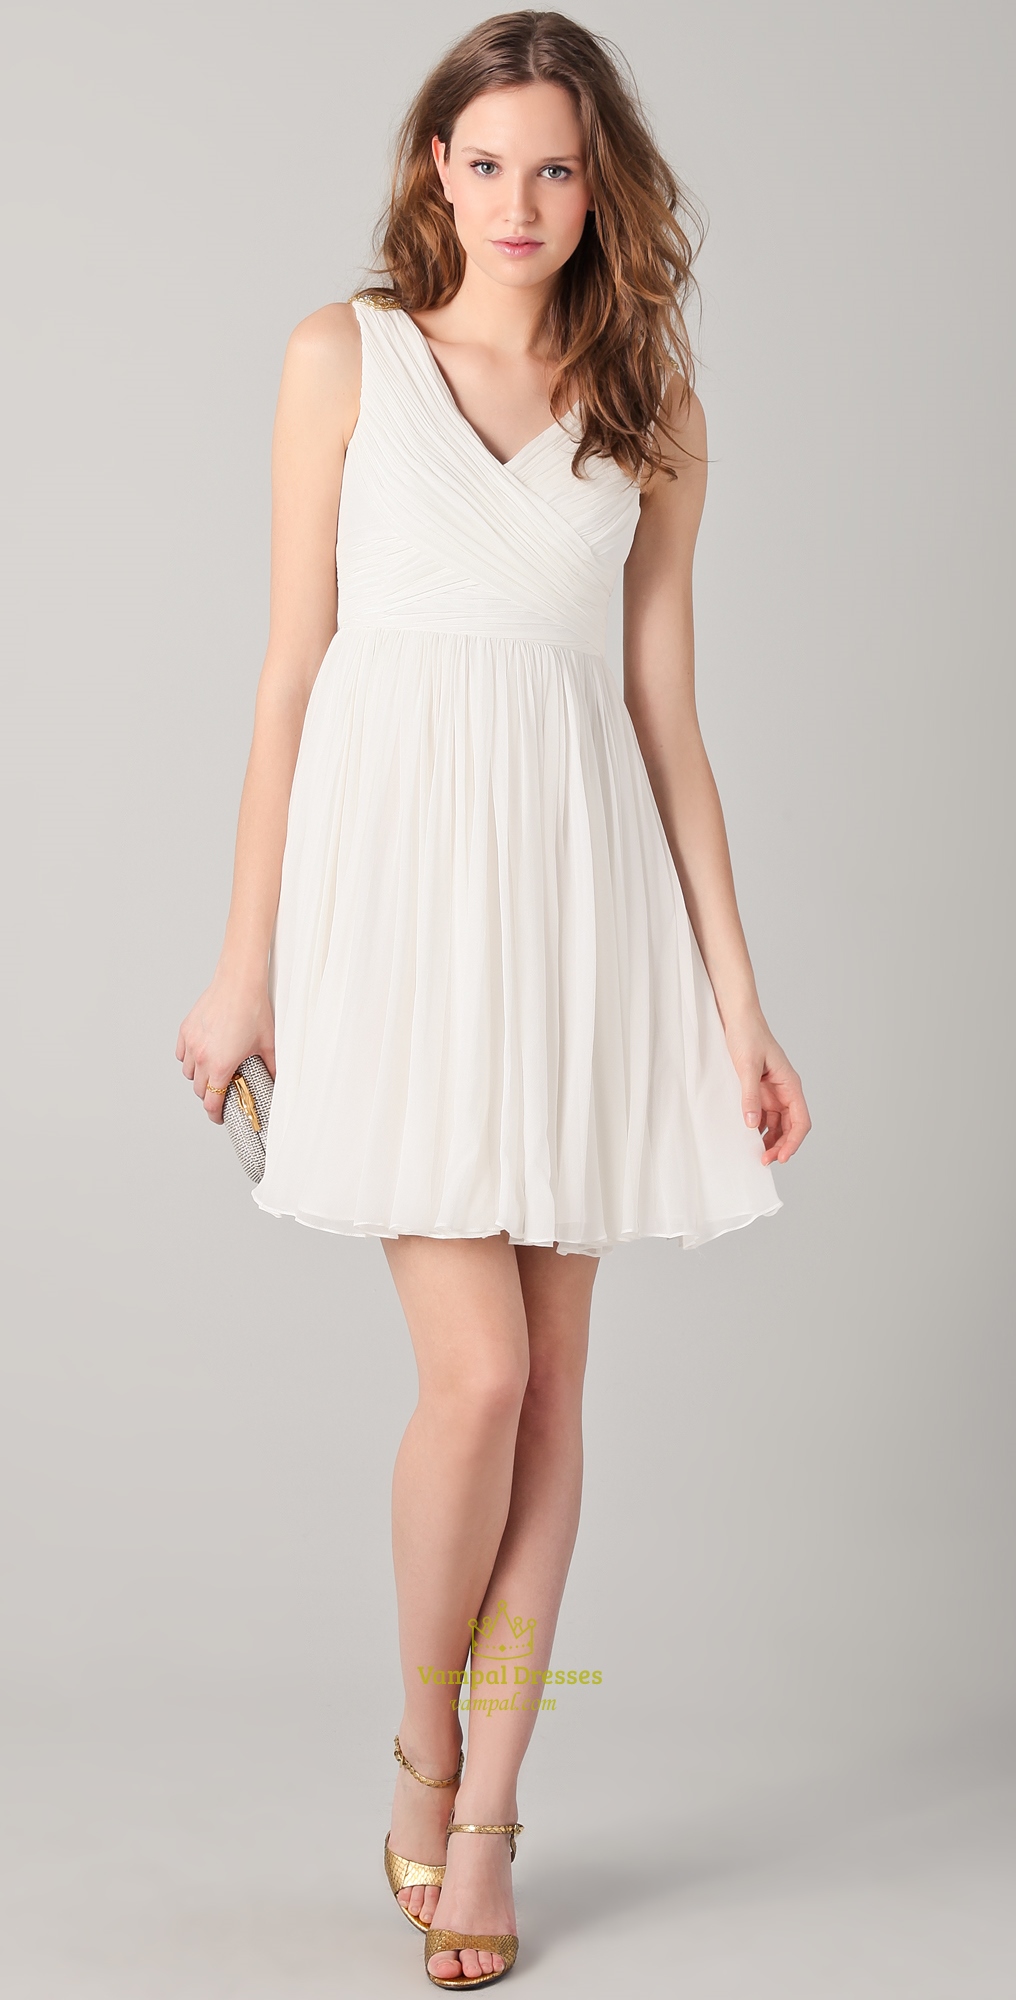 cute-party-dress-affordable-party-dress-wedding